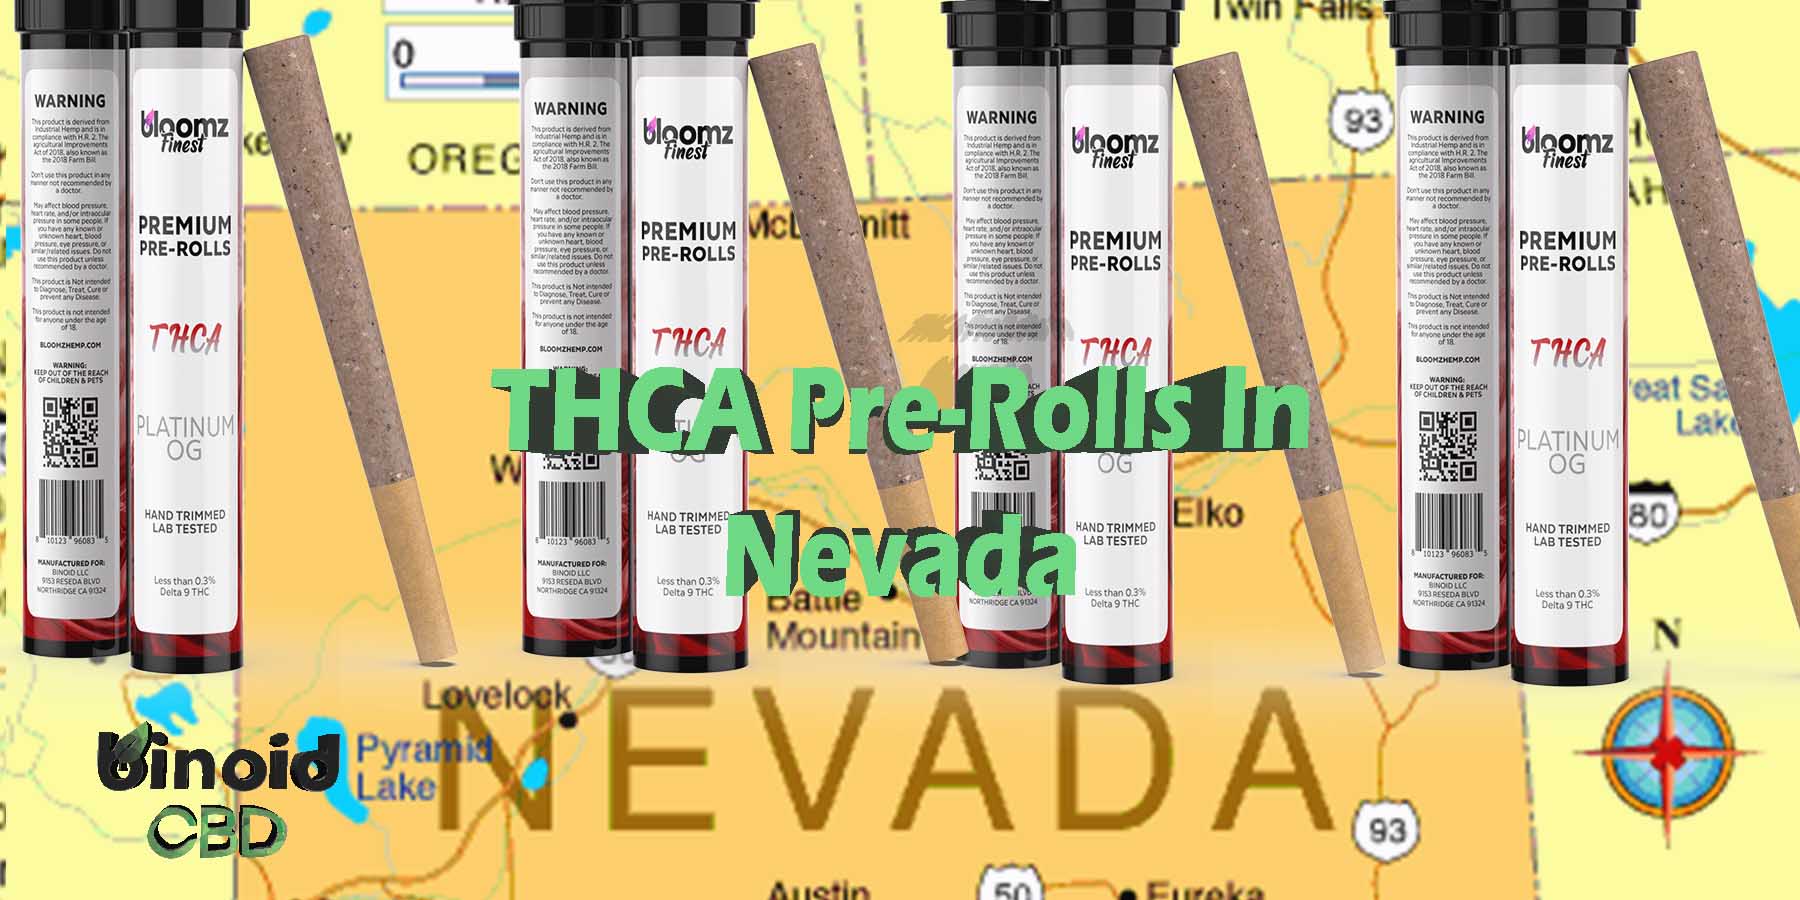 THCA Pre-Rolls In Nevada Pre-Rolls Hemp Flower Indica Where To Get Near Me Best Place Lowest Price Coupon Discount Strongest Brand Bloomz